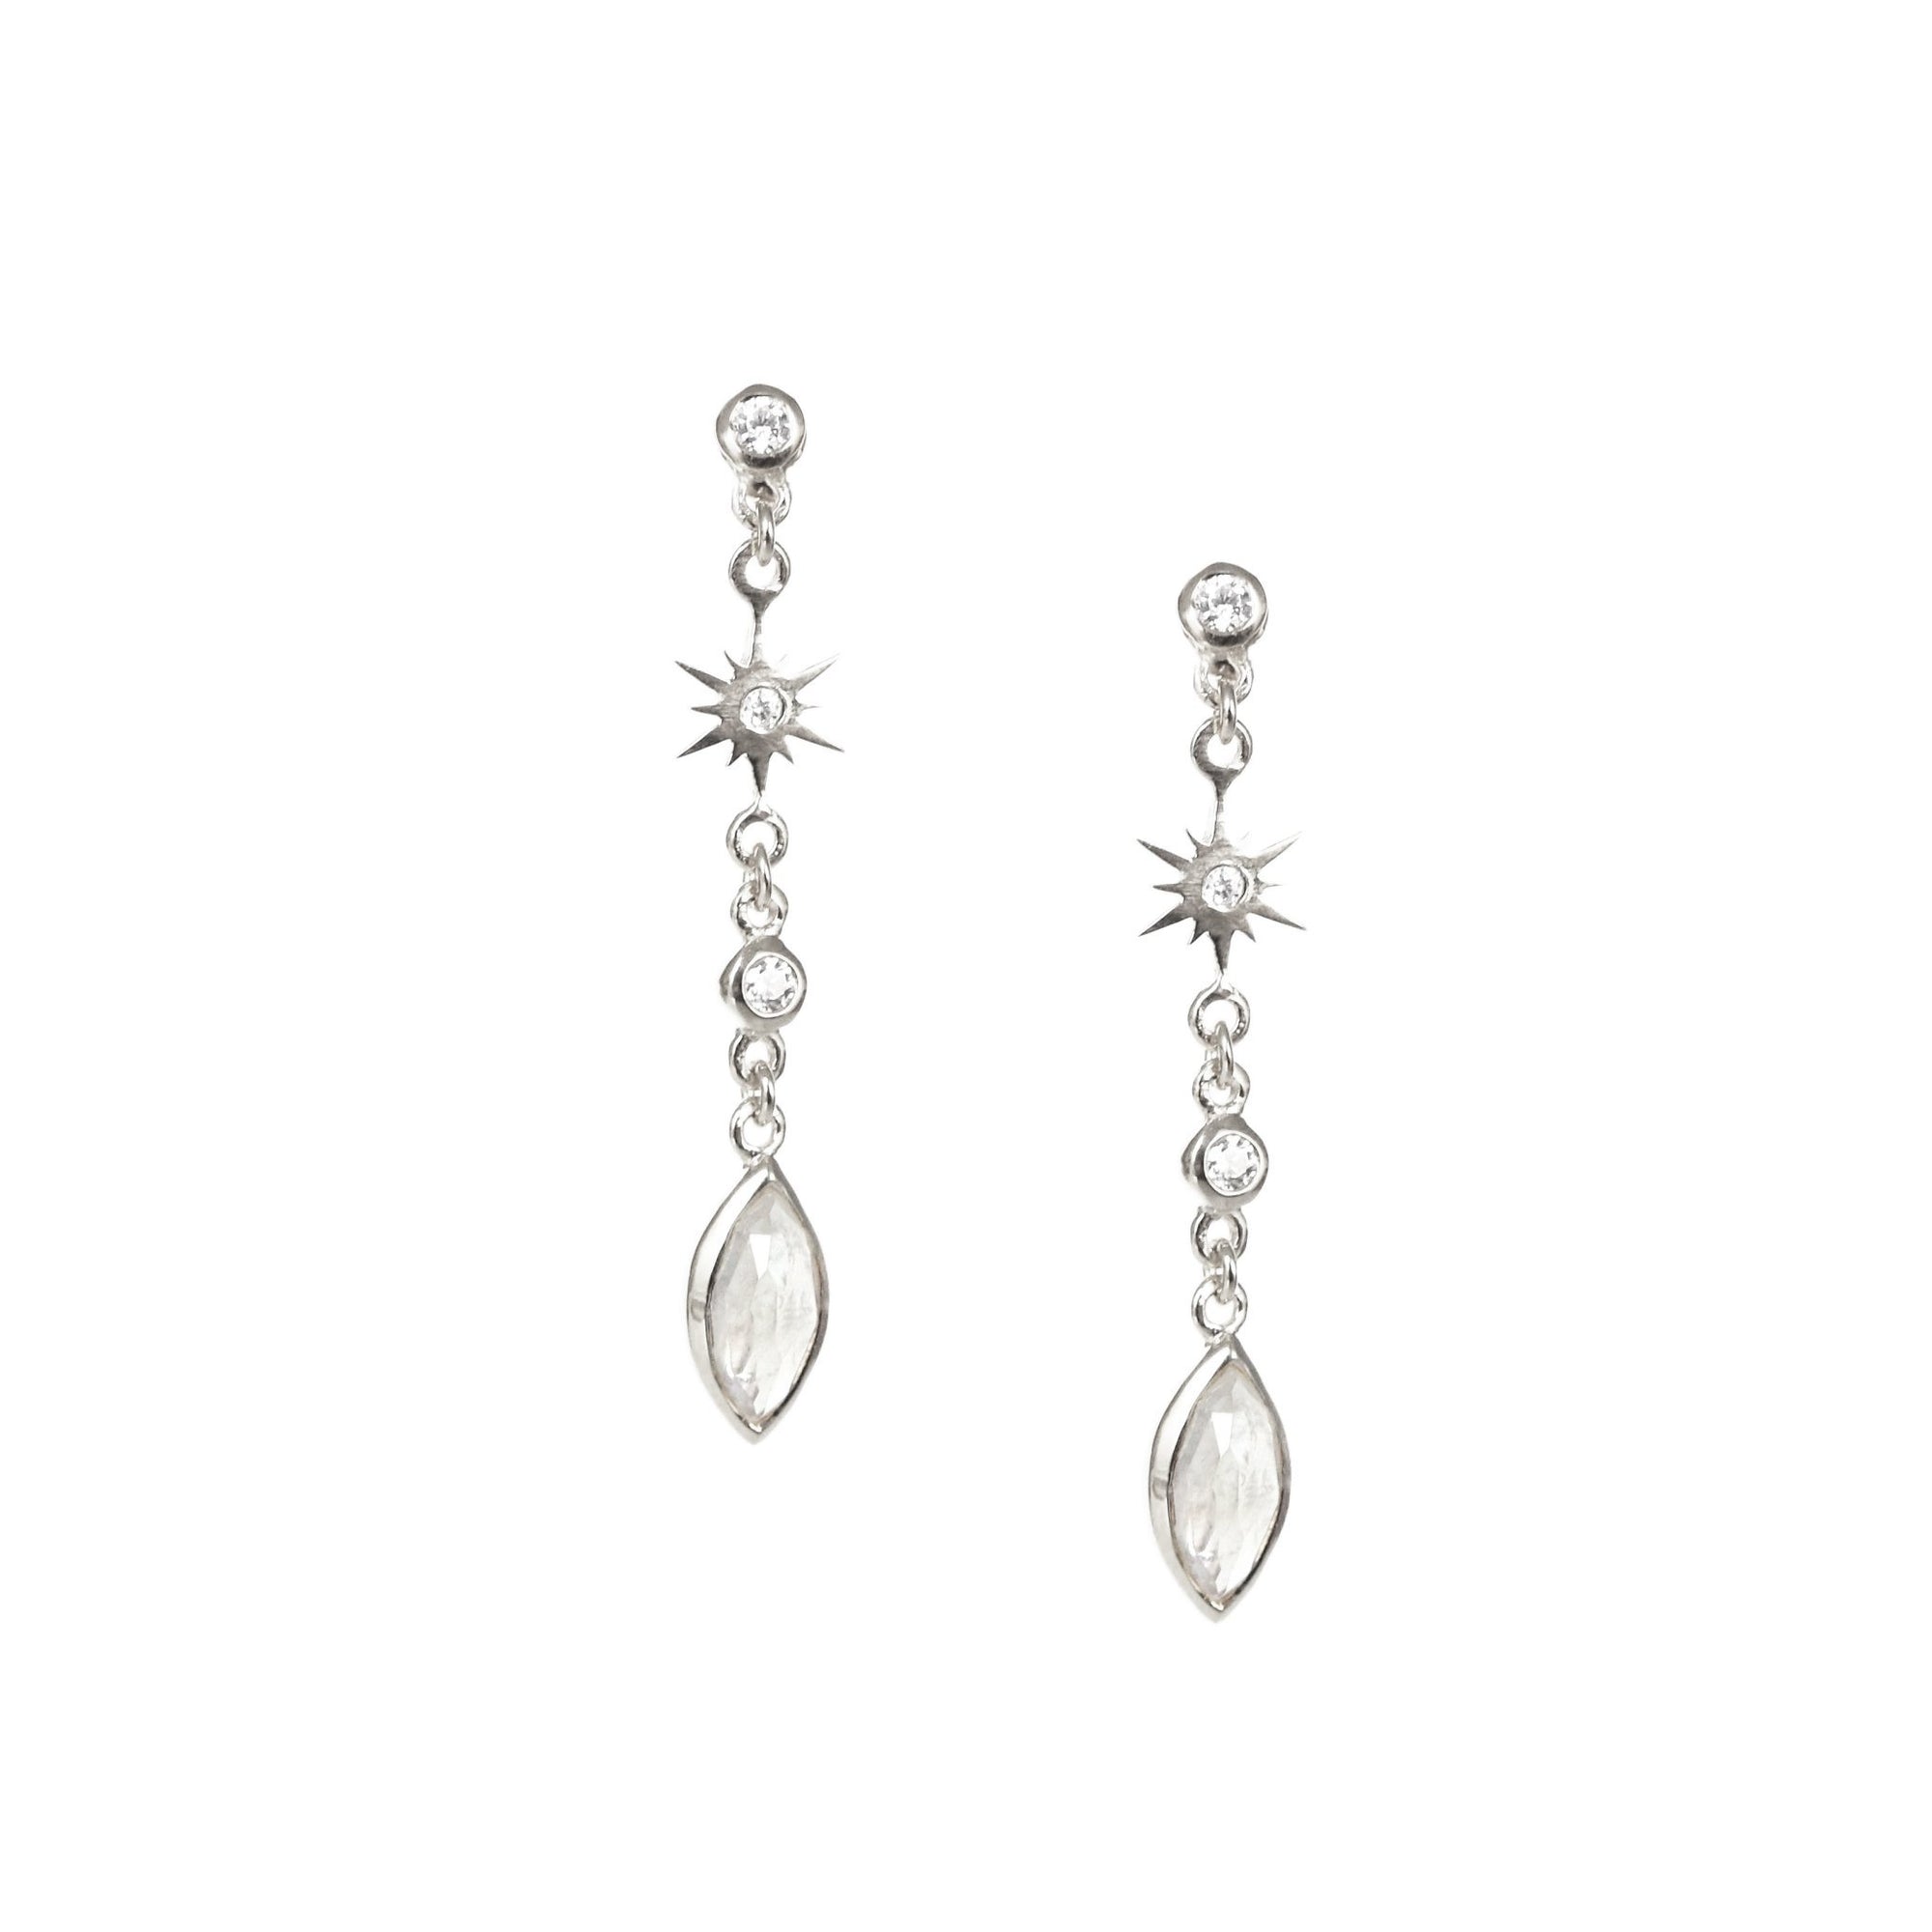 TINY BELIEVE MARQUISE DROP EARRINGS - CUBIC ZIRCONIA, MOONSTONE & SILVER - SO PRETTY CARA COTTER